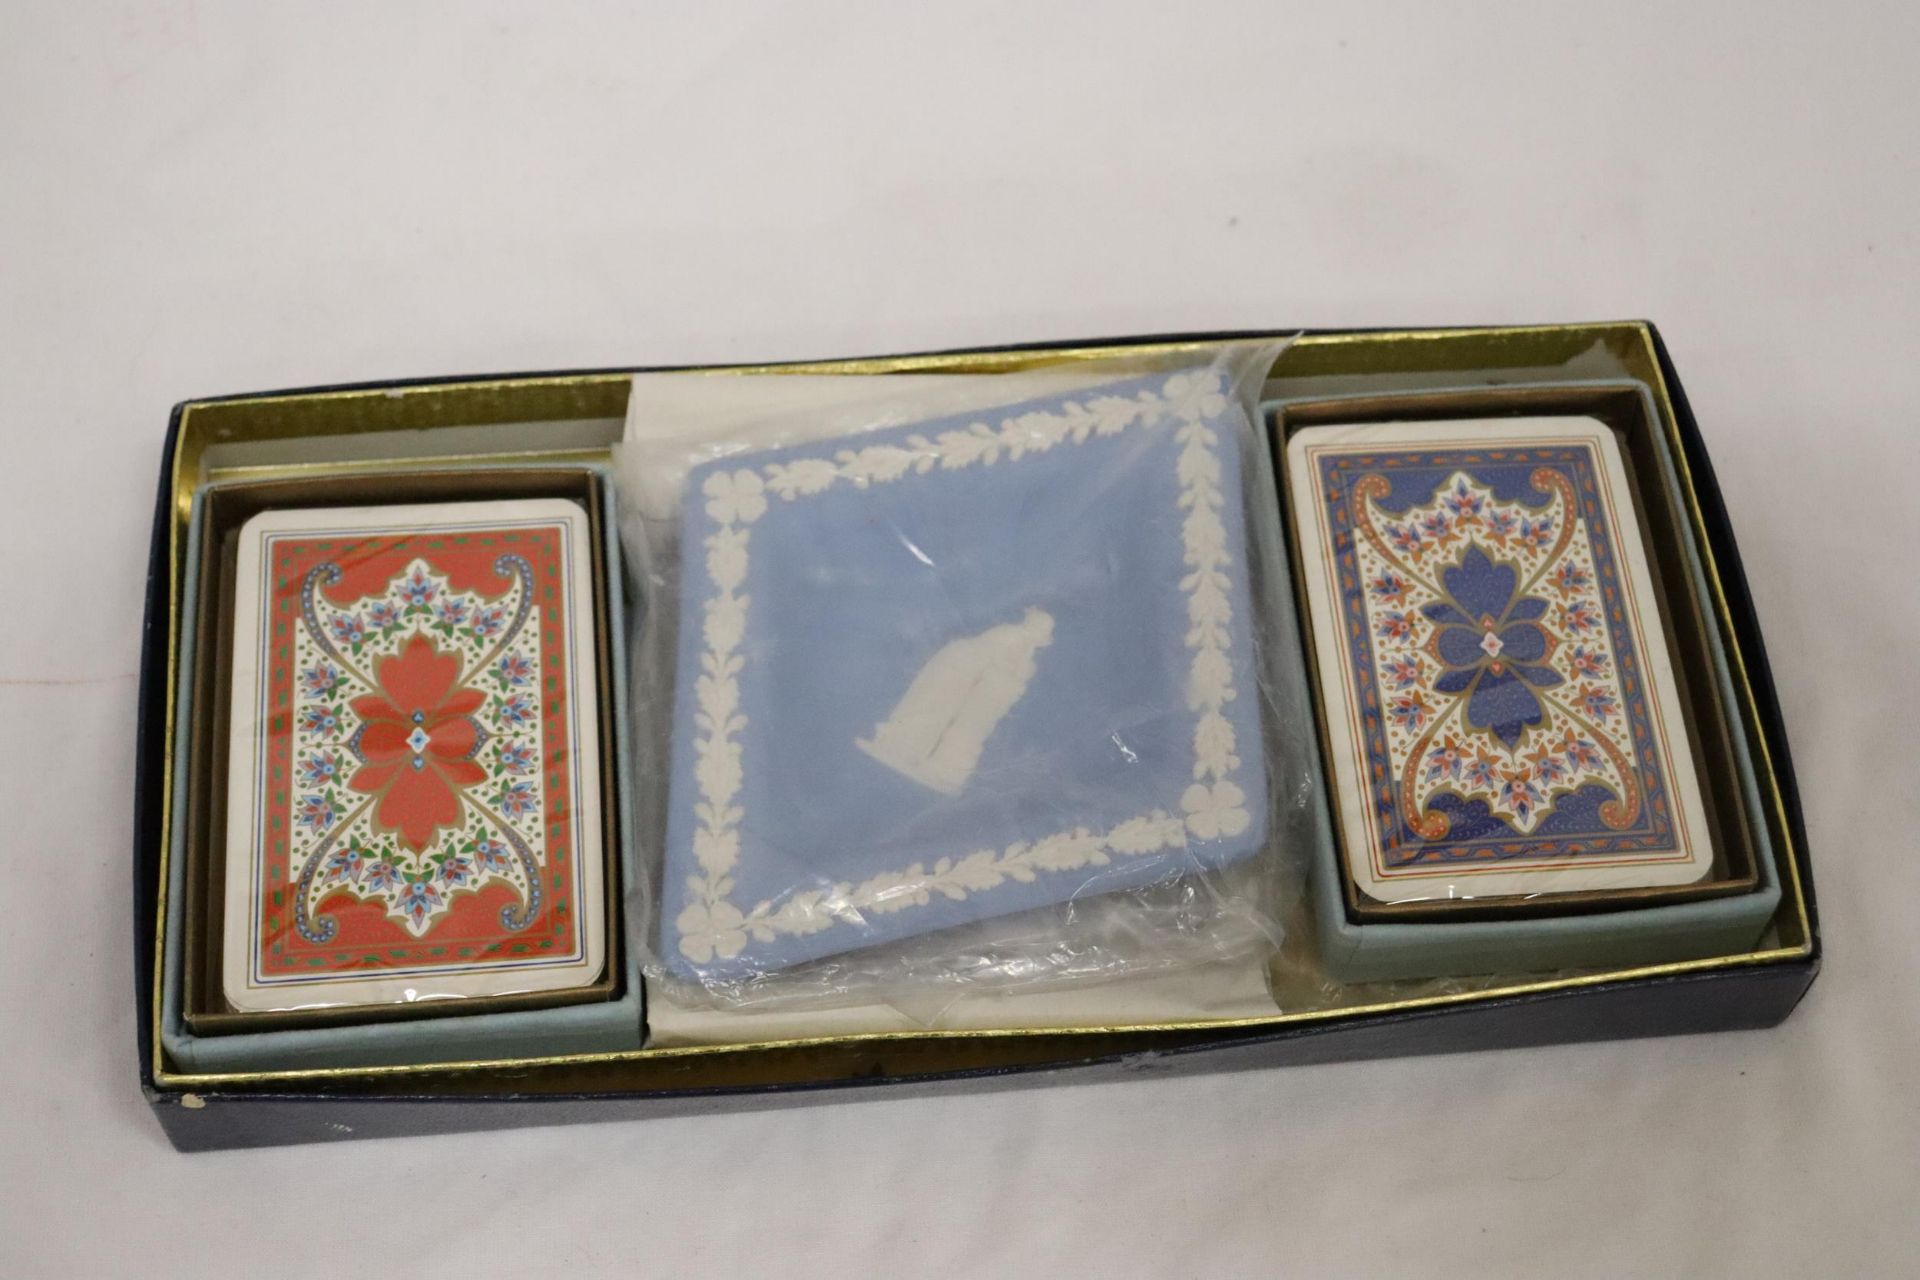 A WADDINGTONS WEDGWOOD JASPER CARD TRAY WITH PLAYING CARDS - Image 2 of 5